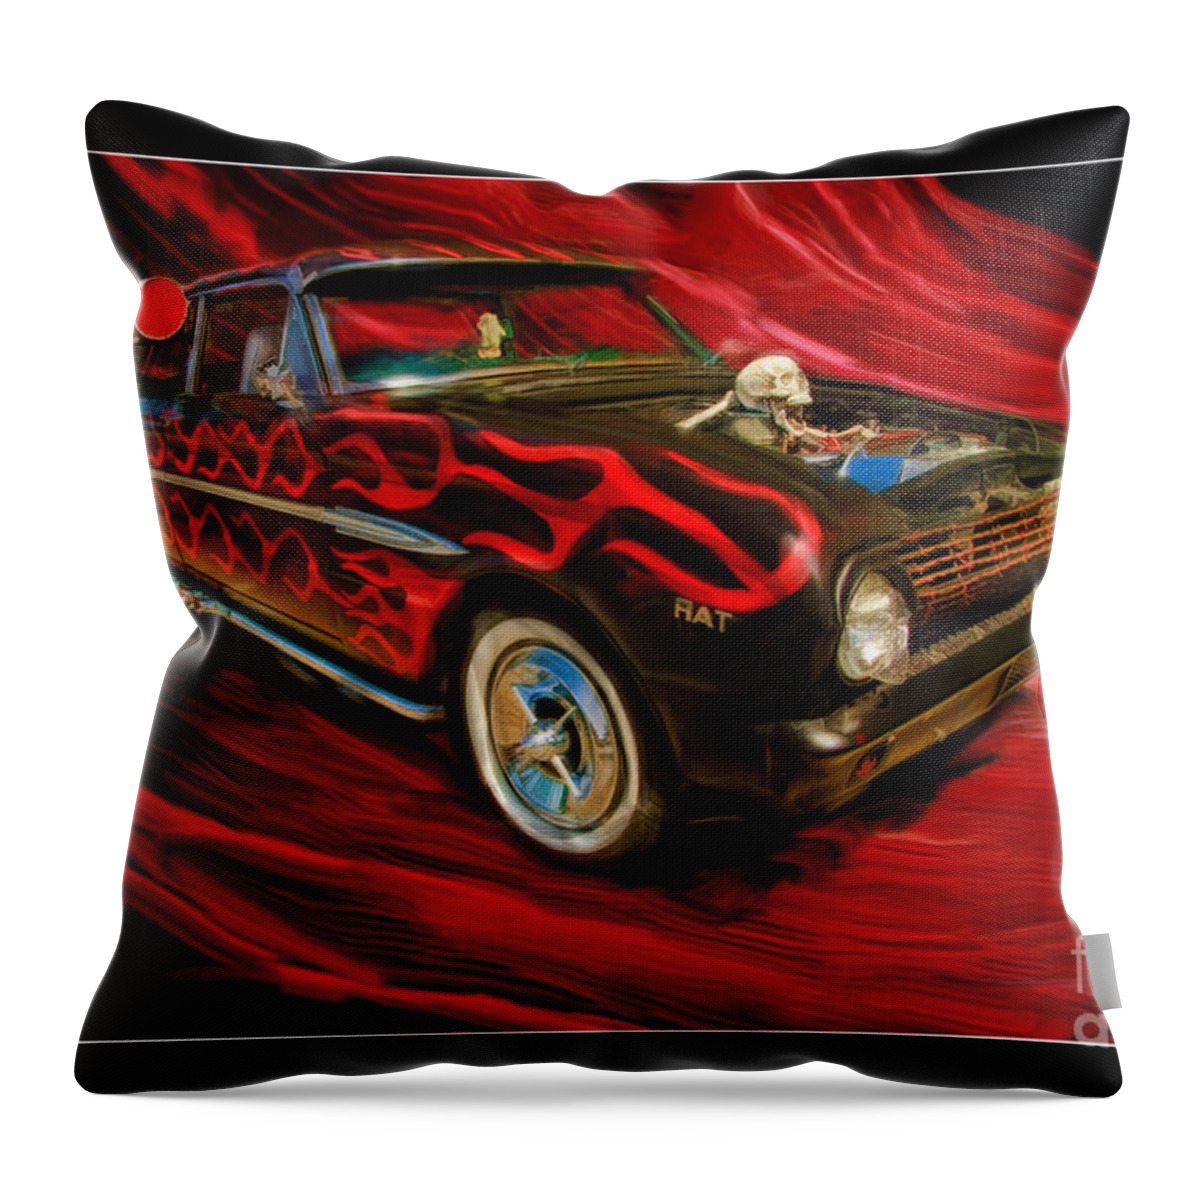 Old Cars Photos Throw Pillow featuring the photograph The Devil's Ride by Blake Richards